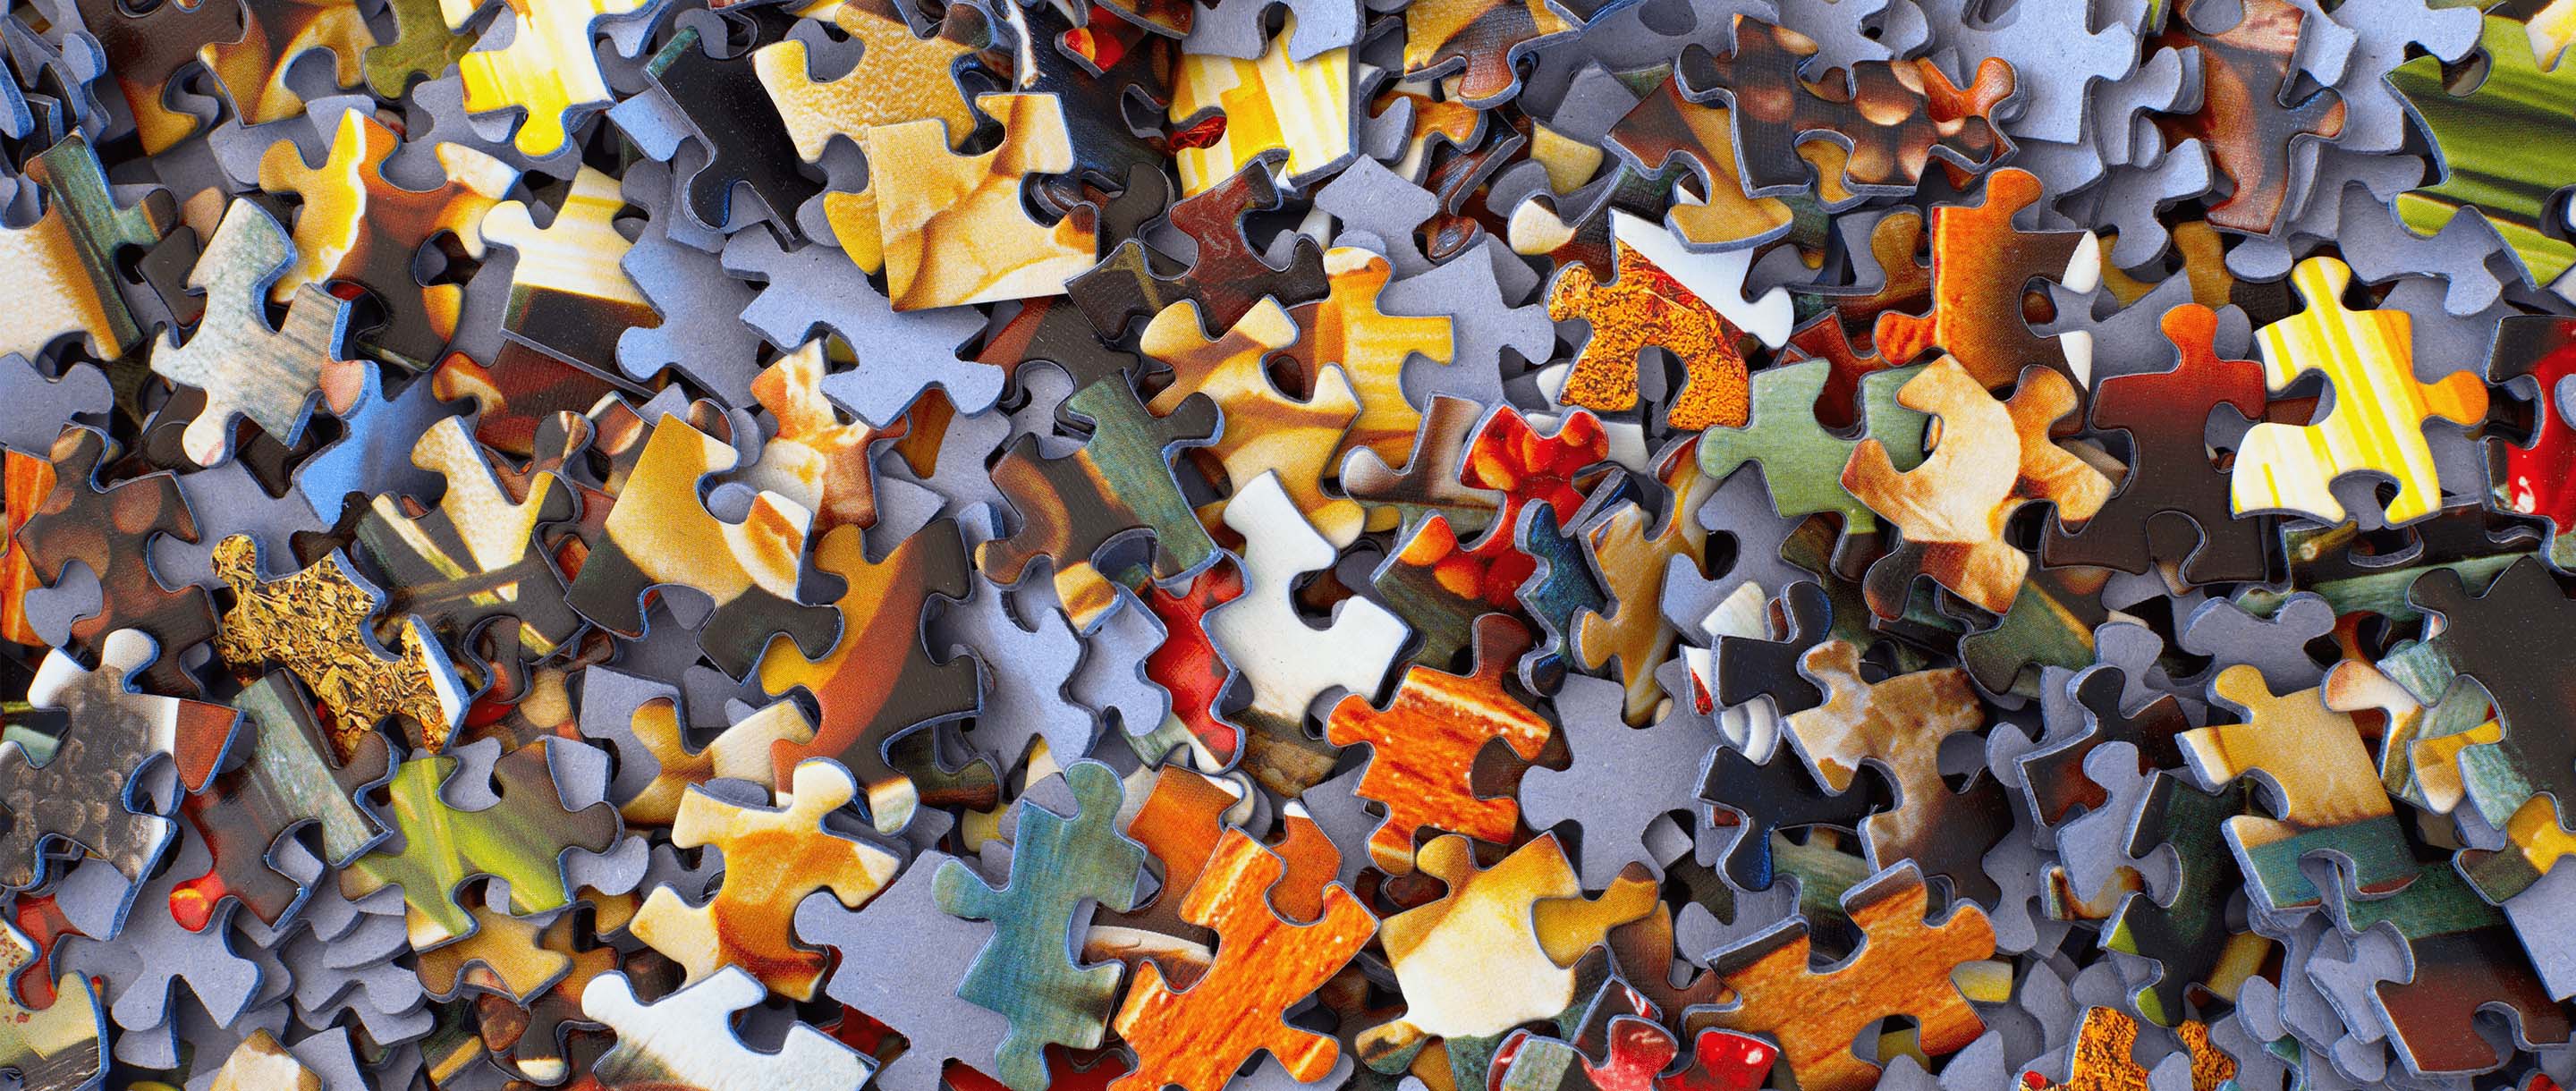 An image showing puzzle pieces all mixed up in a pile.